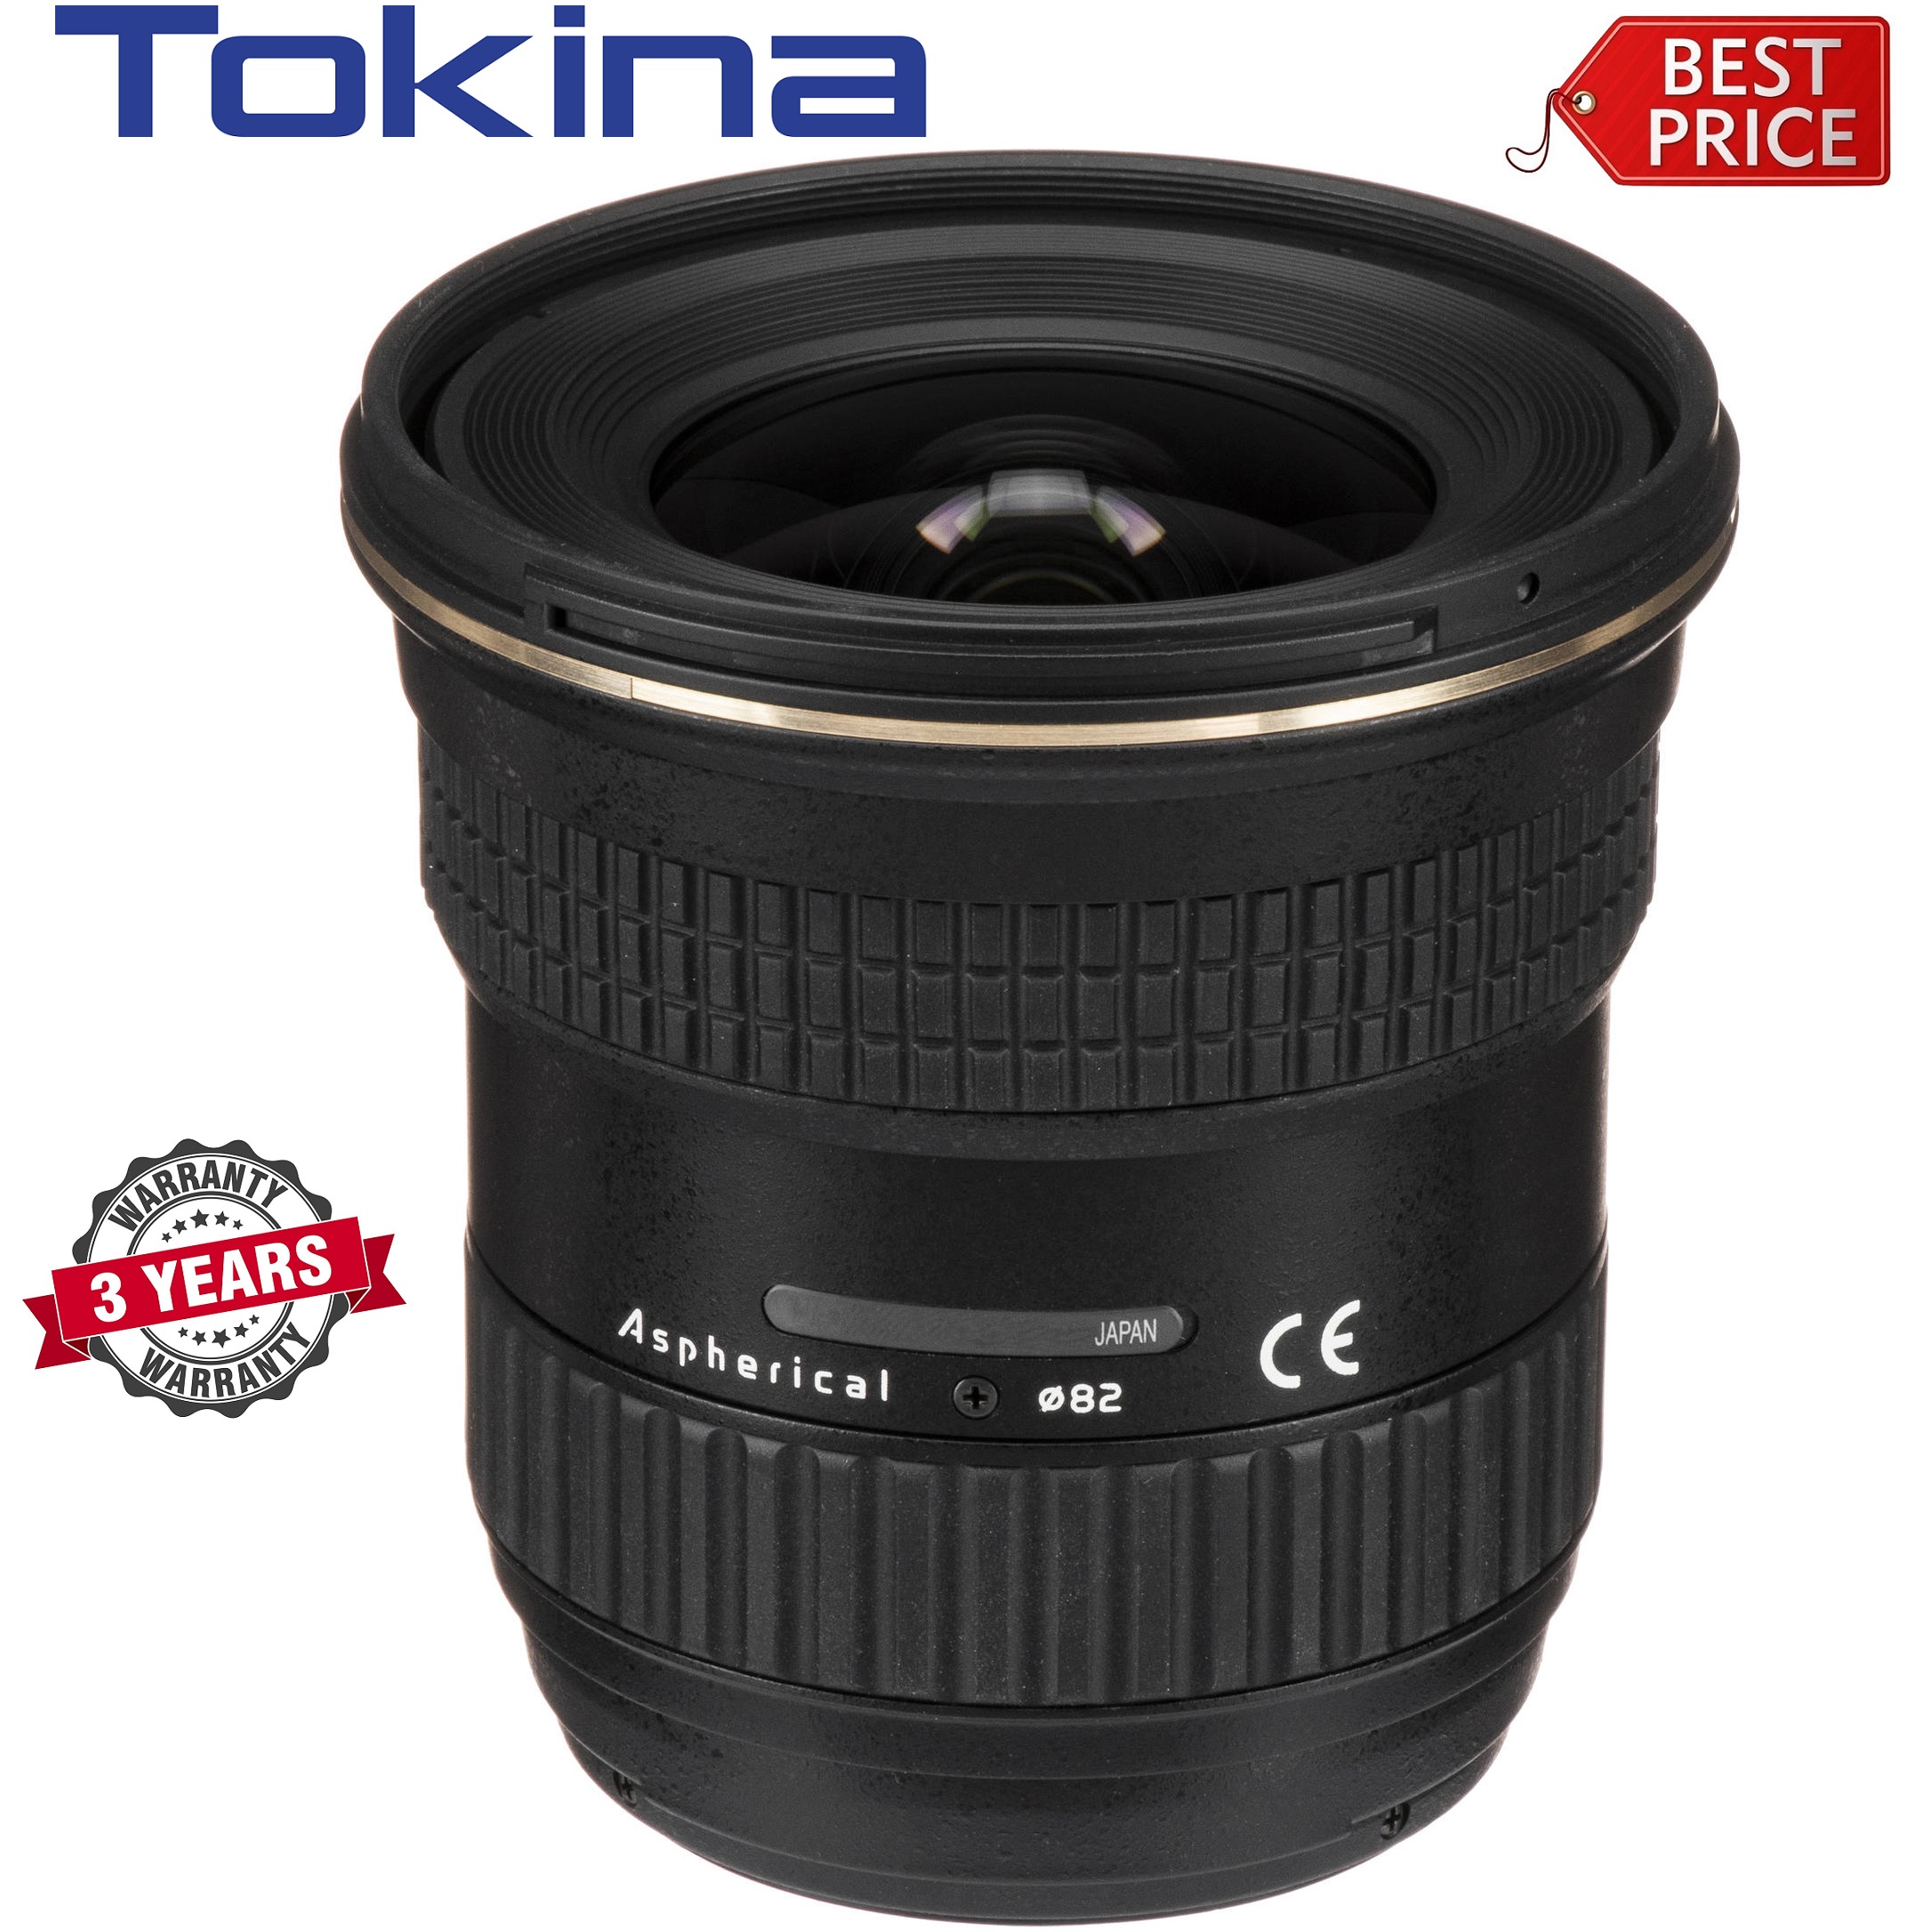 Tokina 17-35mm F4 SD AT-X PRO FX (Canon-Fit)